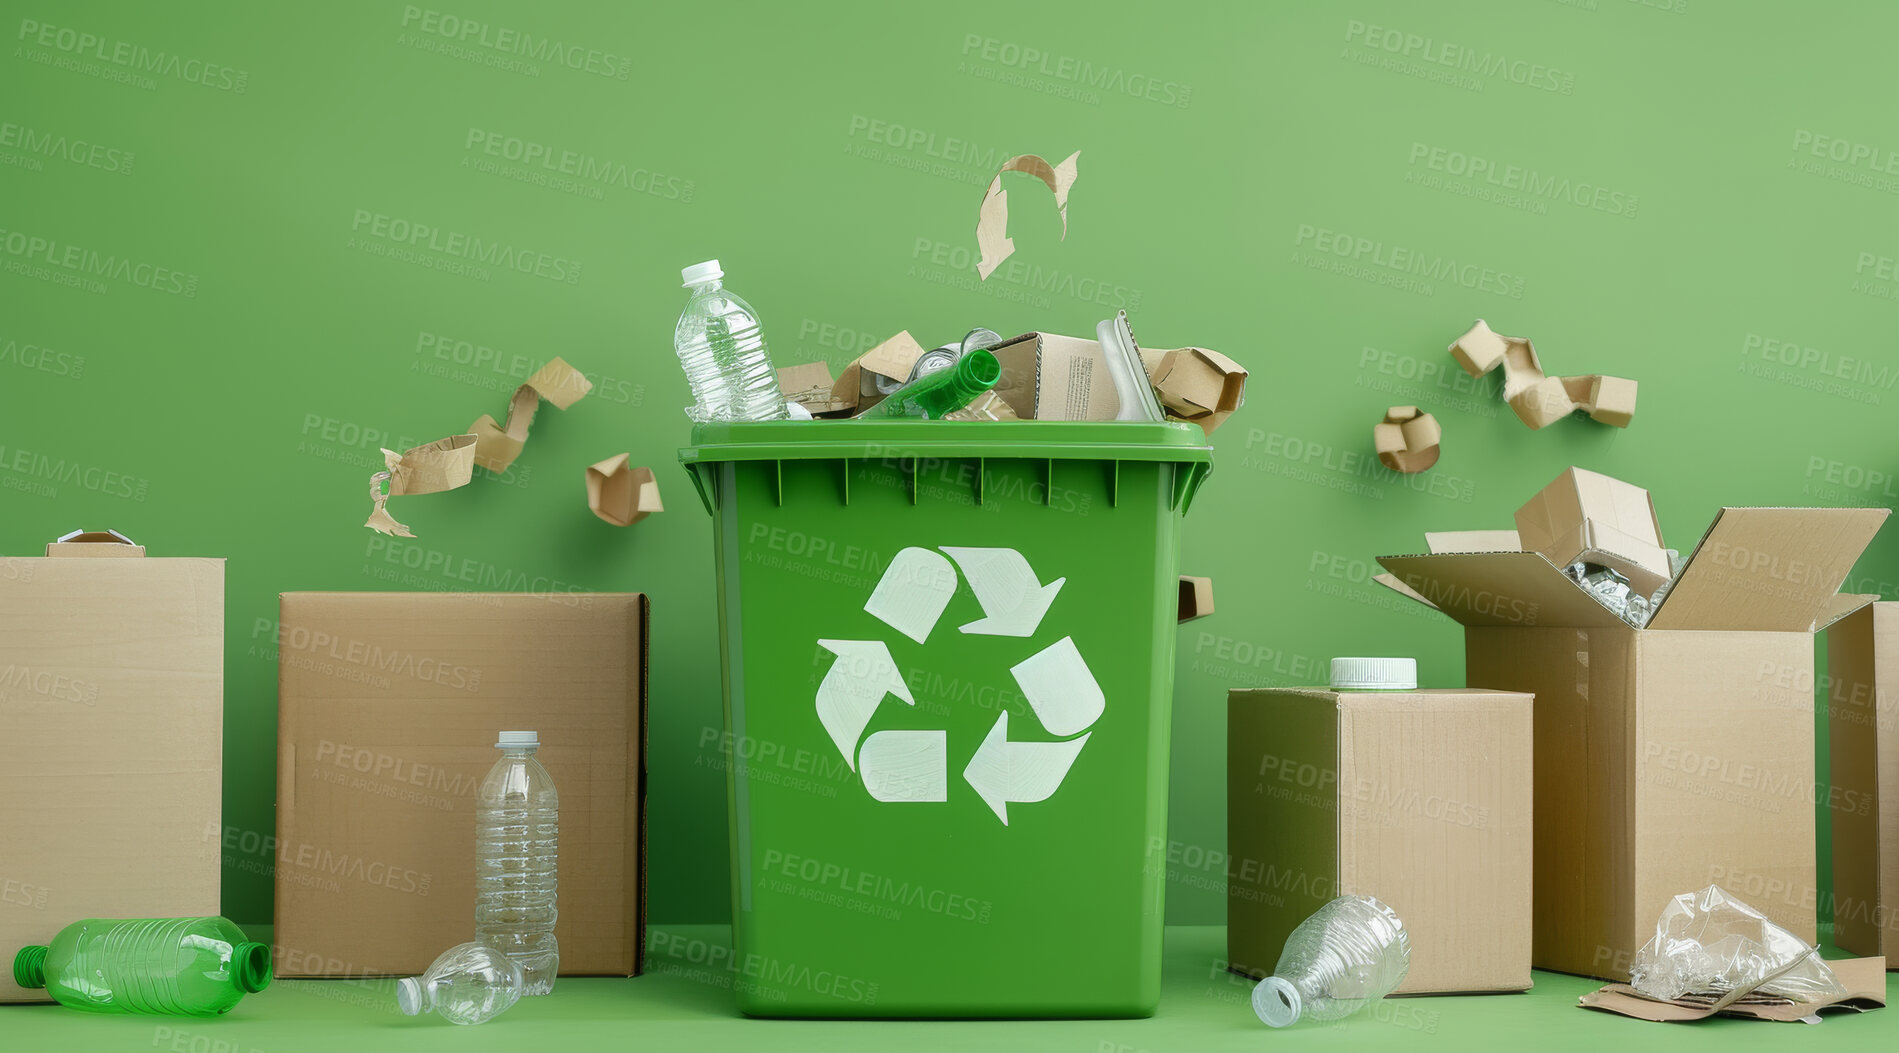 Buy stock photo Trash, dumpster and recycle sign background mockup for environmental, awareness and sustainability concept. Green backdrop, mockup and symbol with copyspace for Earth Day, eco system or ecology logo